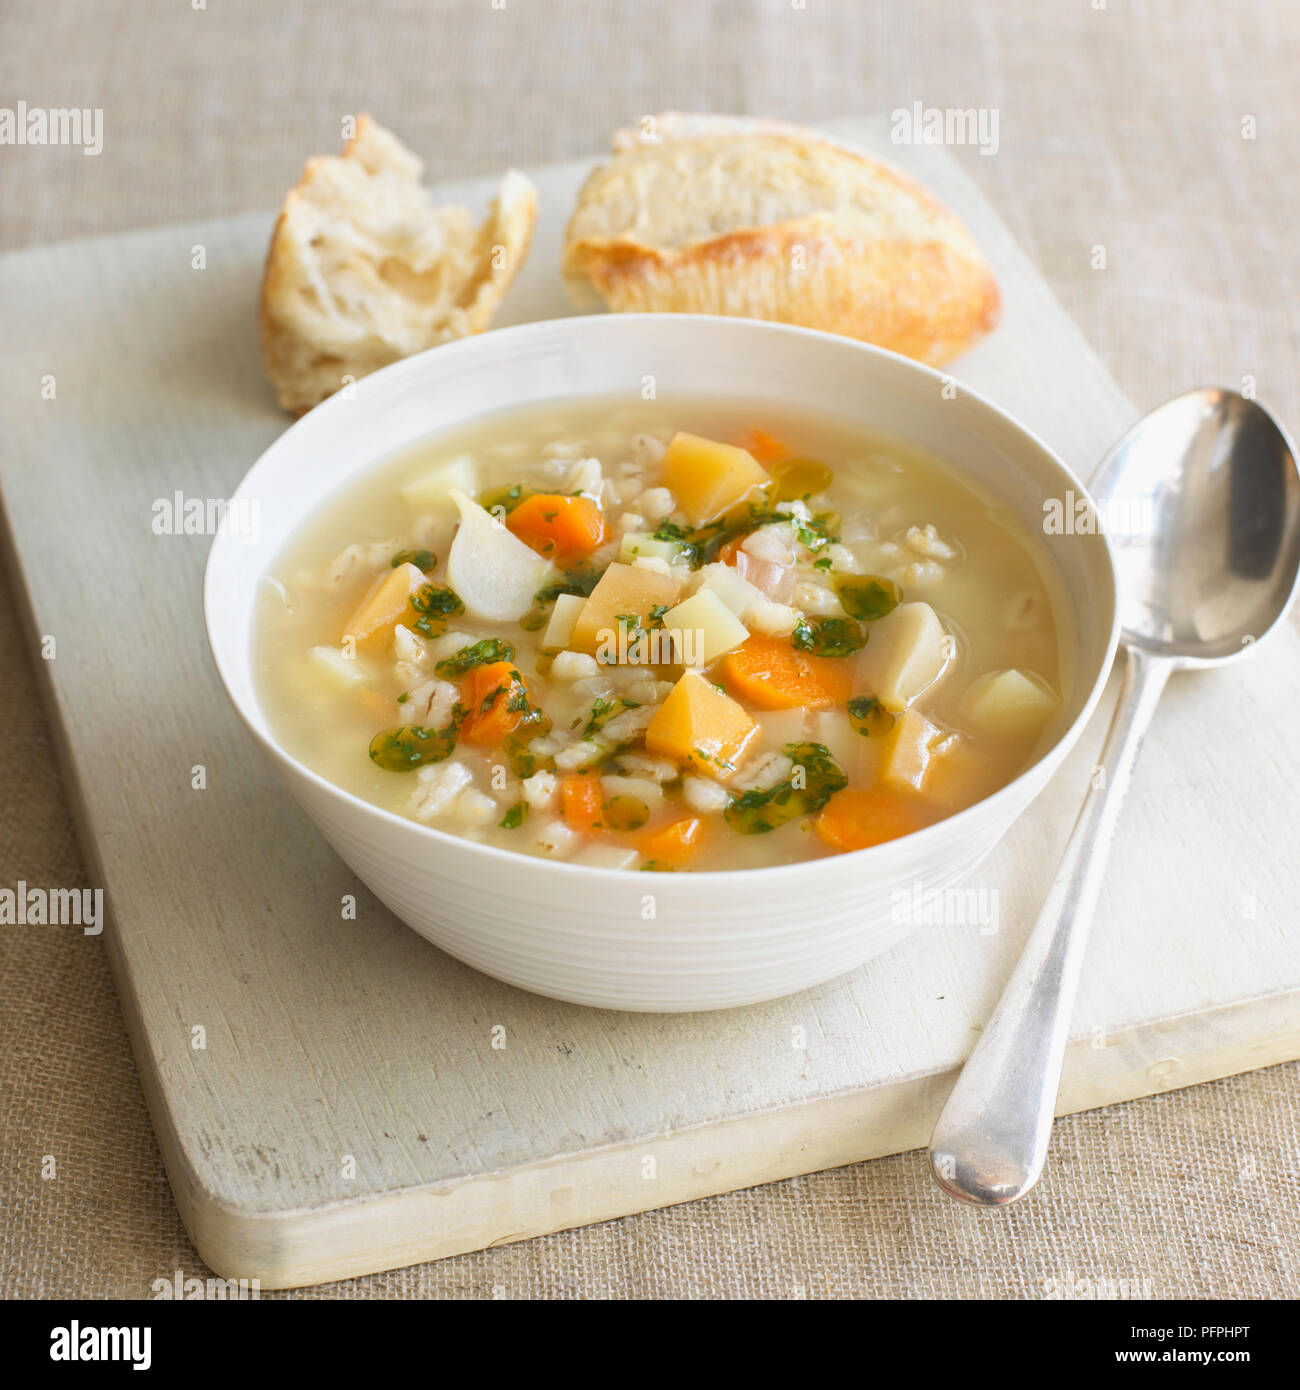 Bowl of leek, barley and root vegetable broth with olive oil, served with some white bread Stock Photo